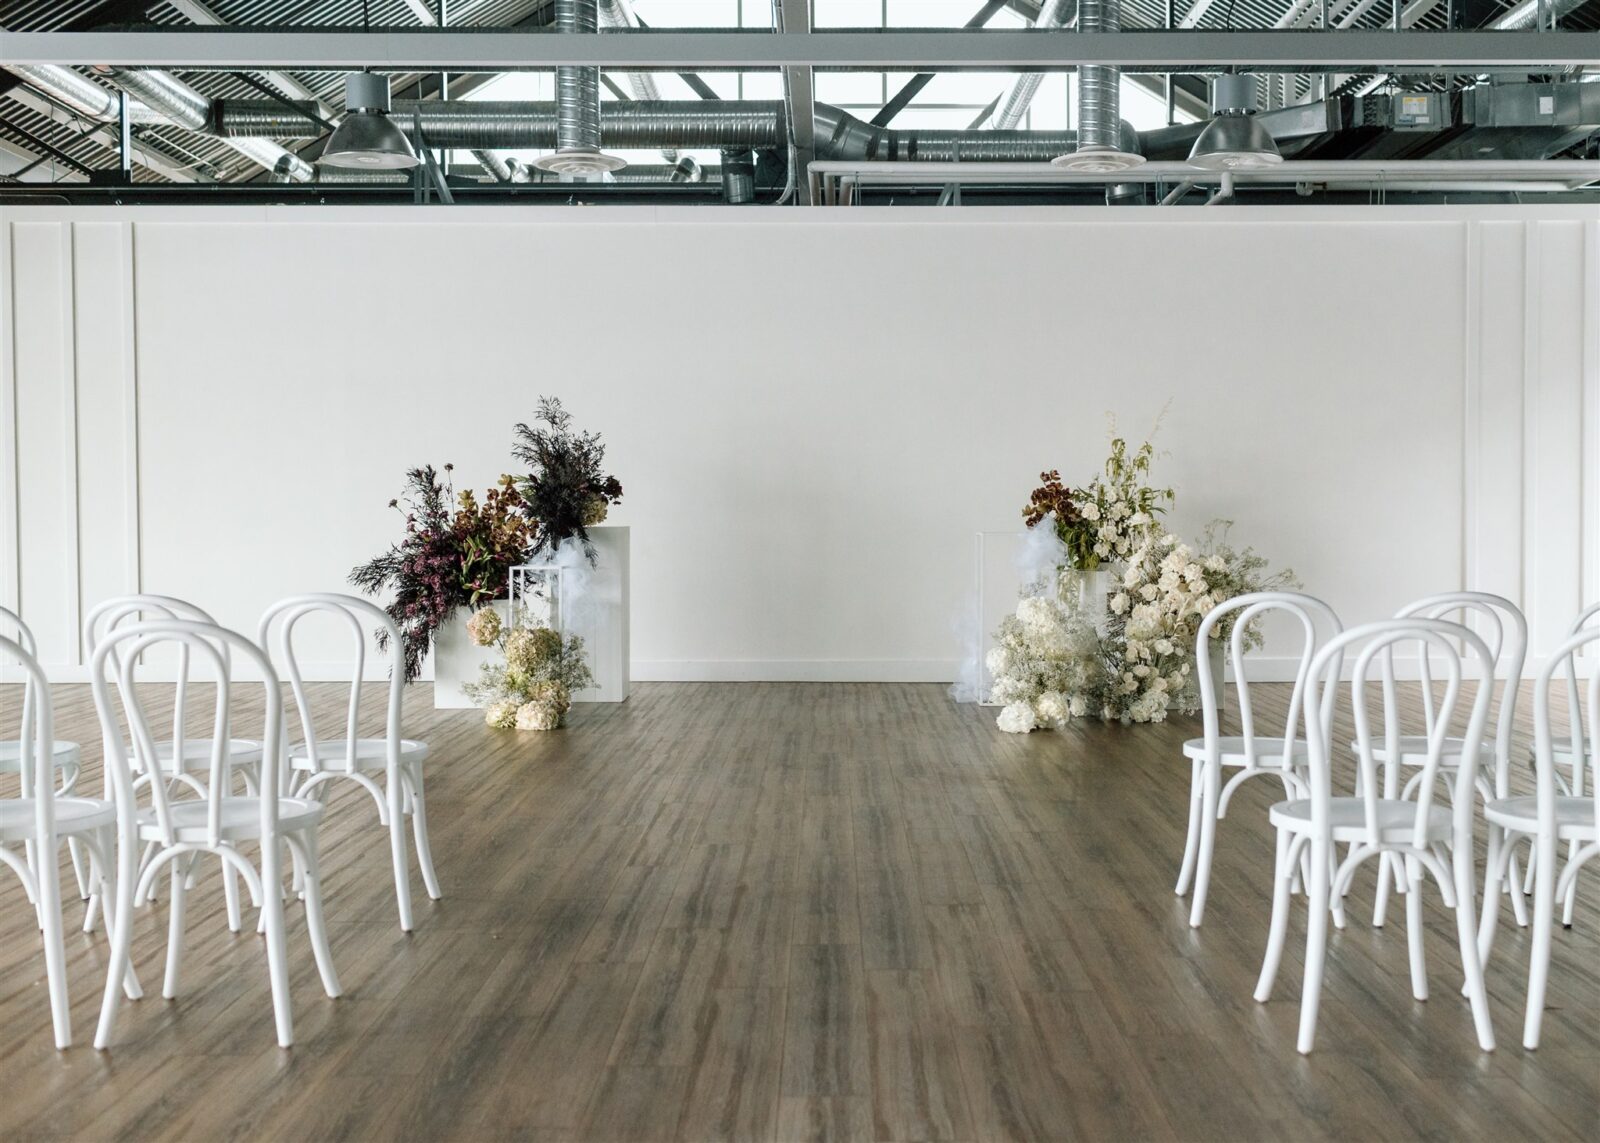 Chic and minimalist wedding ceremony at The Wallace Venue in Vancouver, BC. Featuring stunning plum and white florals by Celsia Florals.